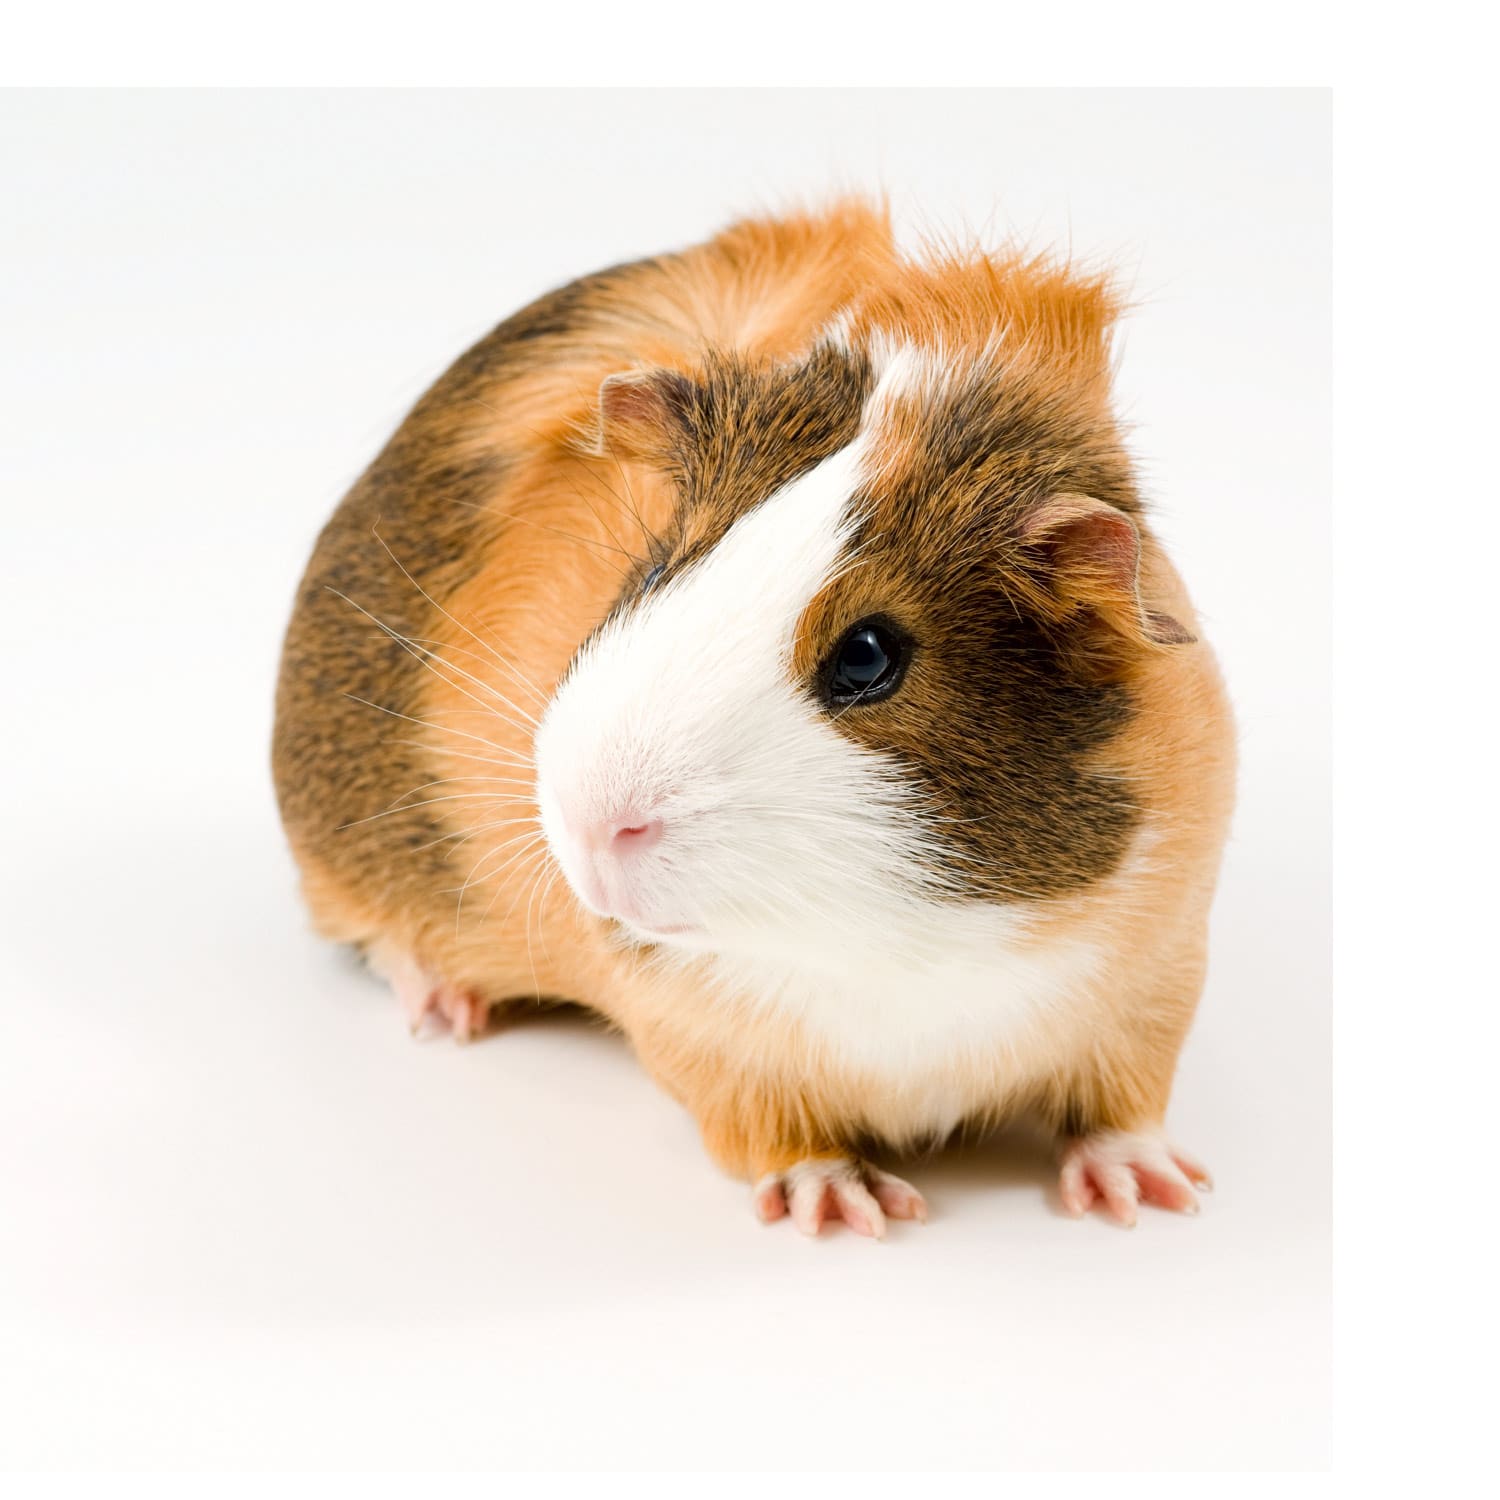 Guinea Pigs for Sale: Buy Live Guinea Pigs for Sale | Petco